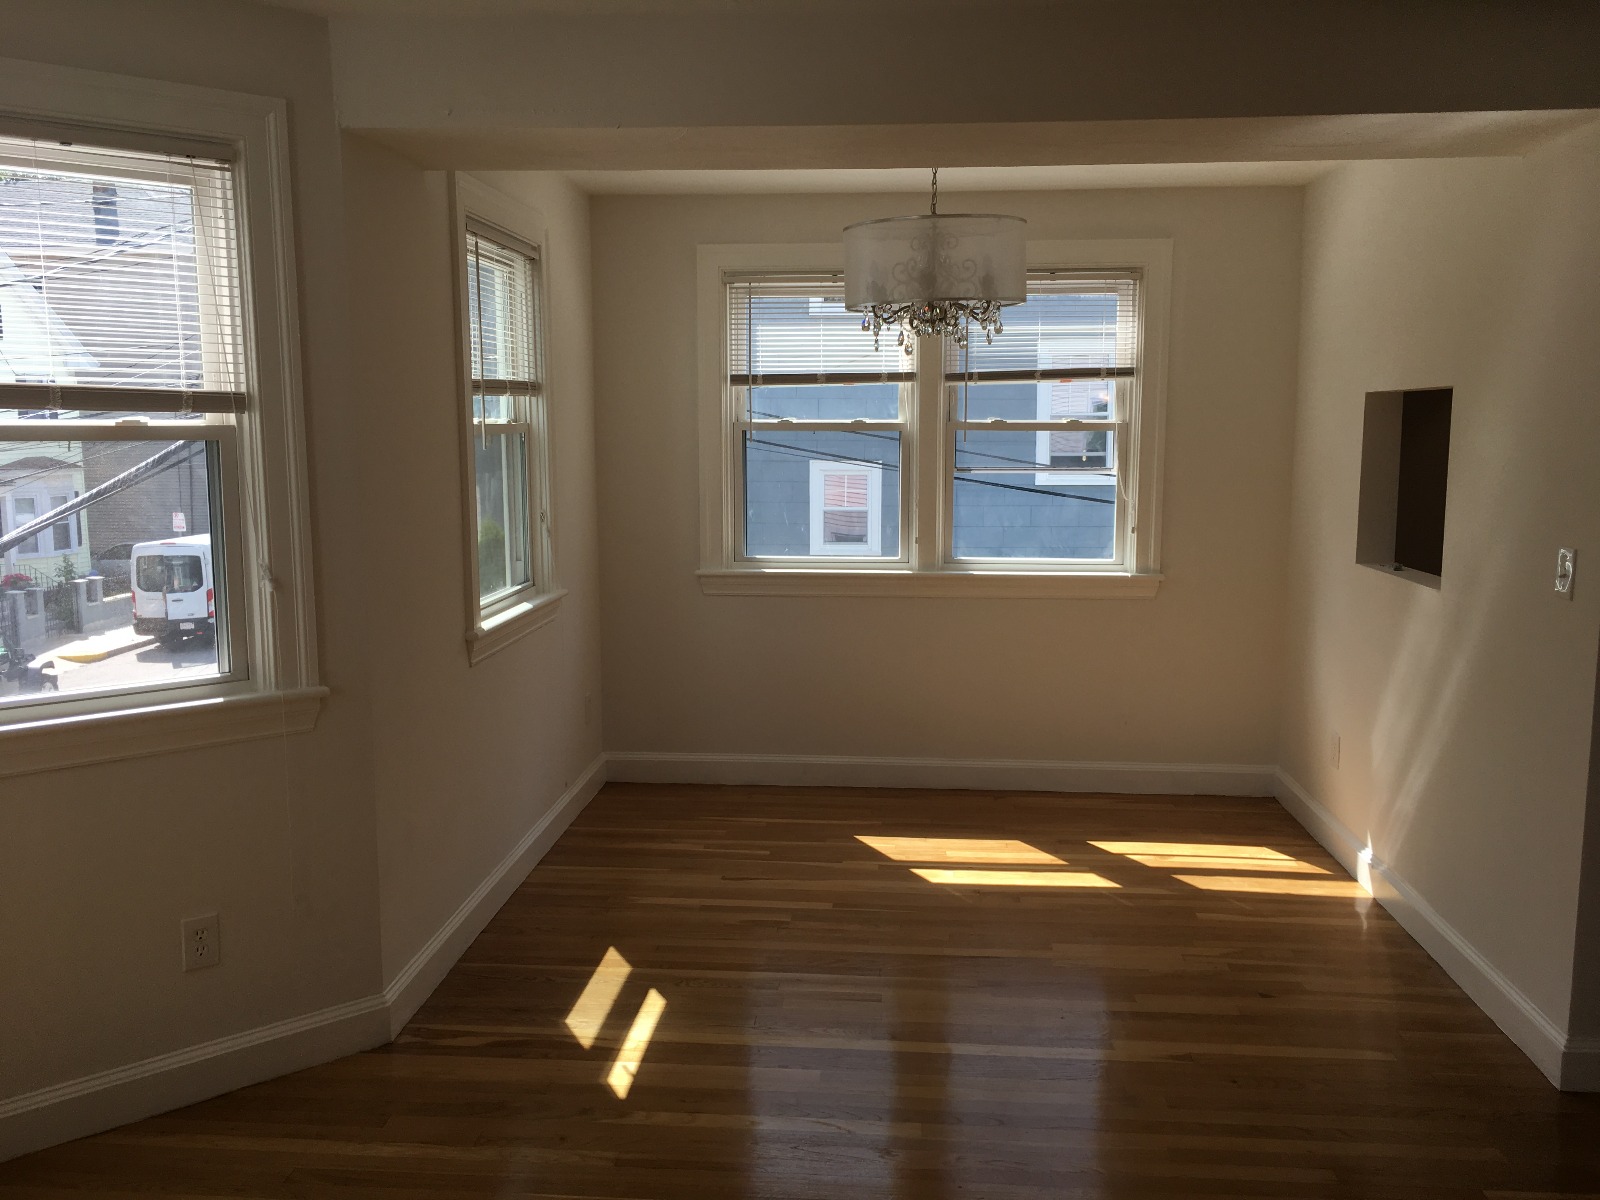 Photos of apartment on Bynner St.,Boston MA 02130